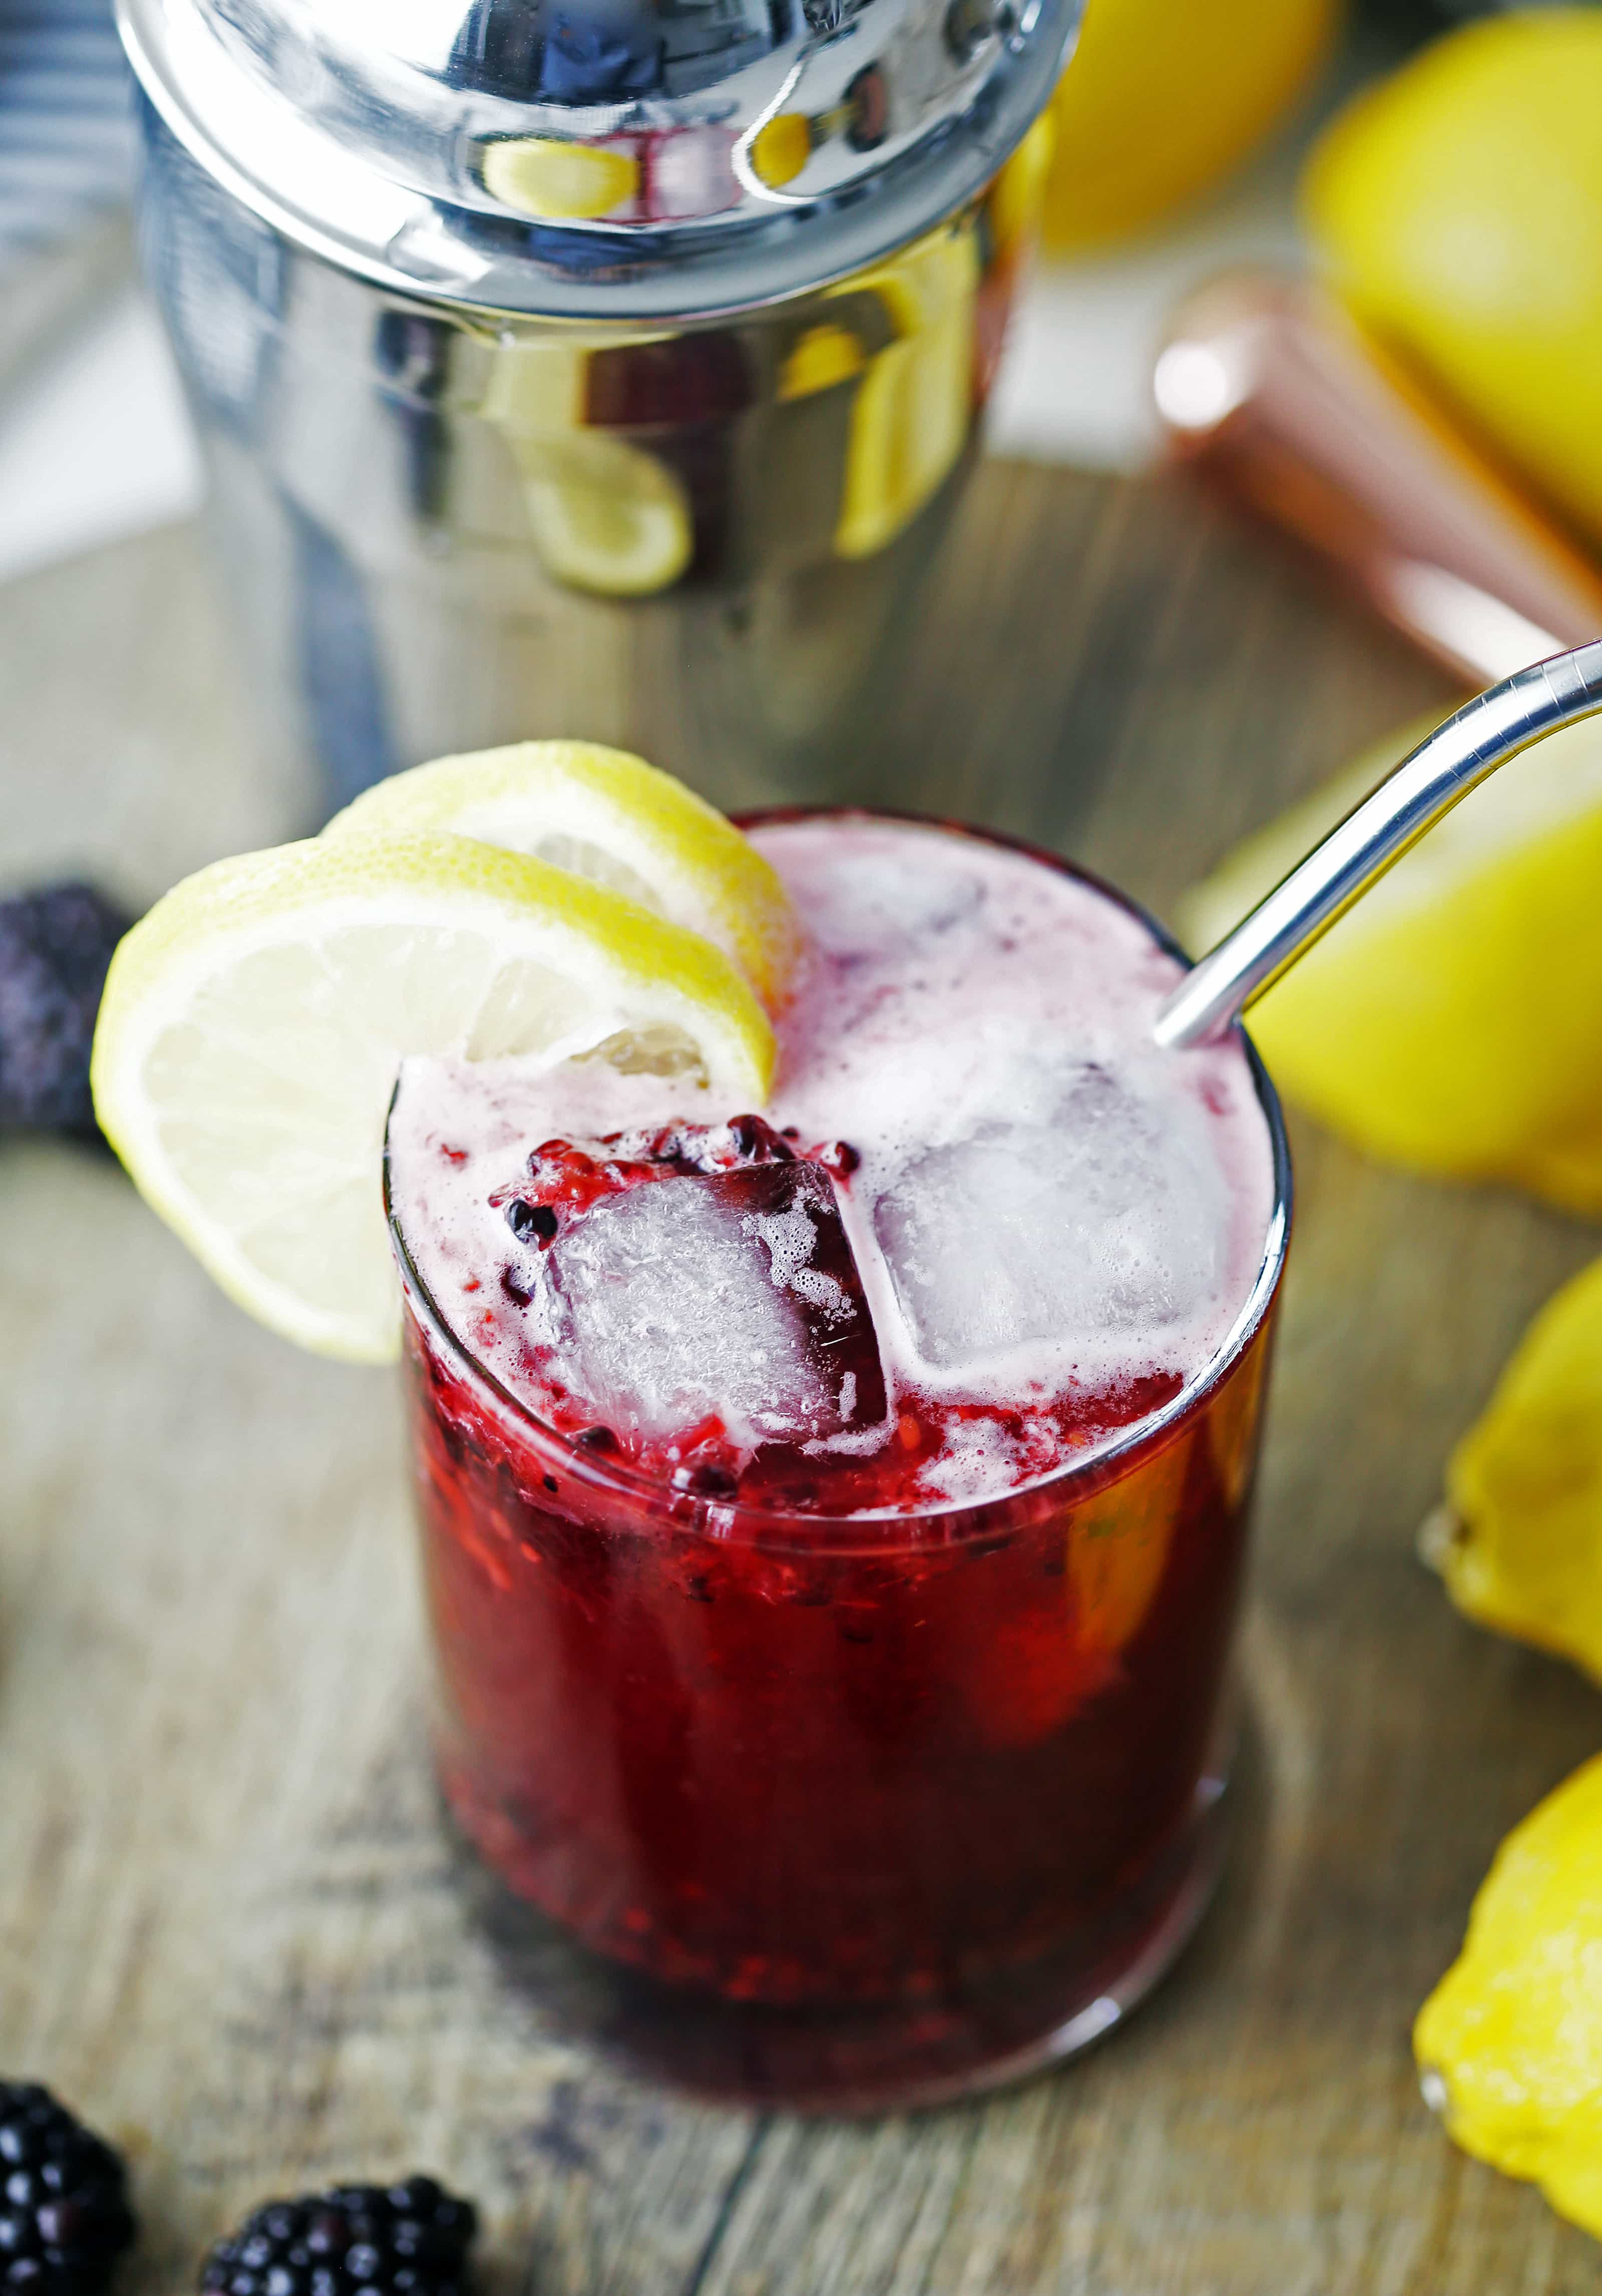 An overhead view of a glass of blackberry lemon smash cocktail with lemon slices and a straw in it.